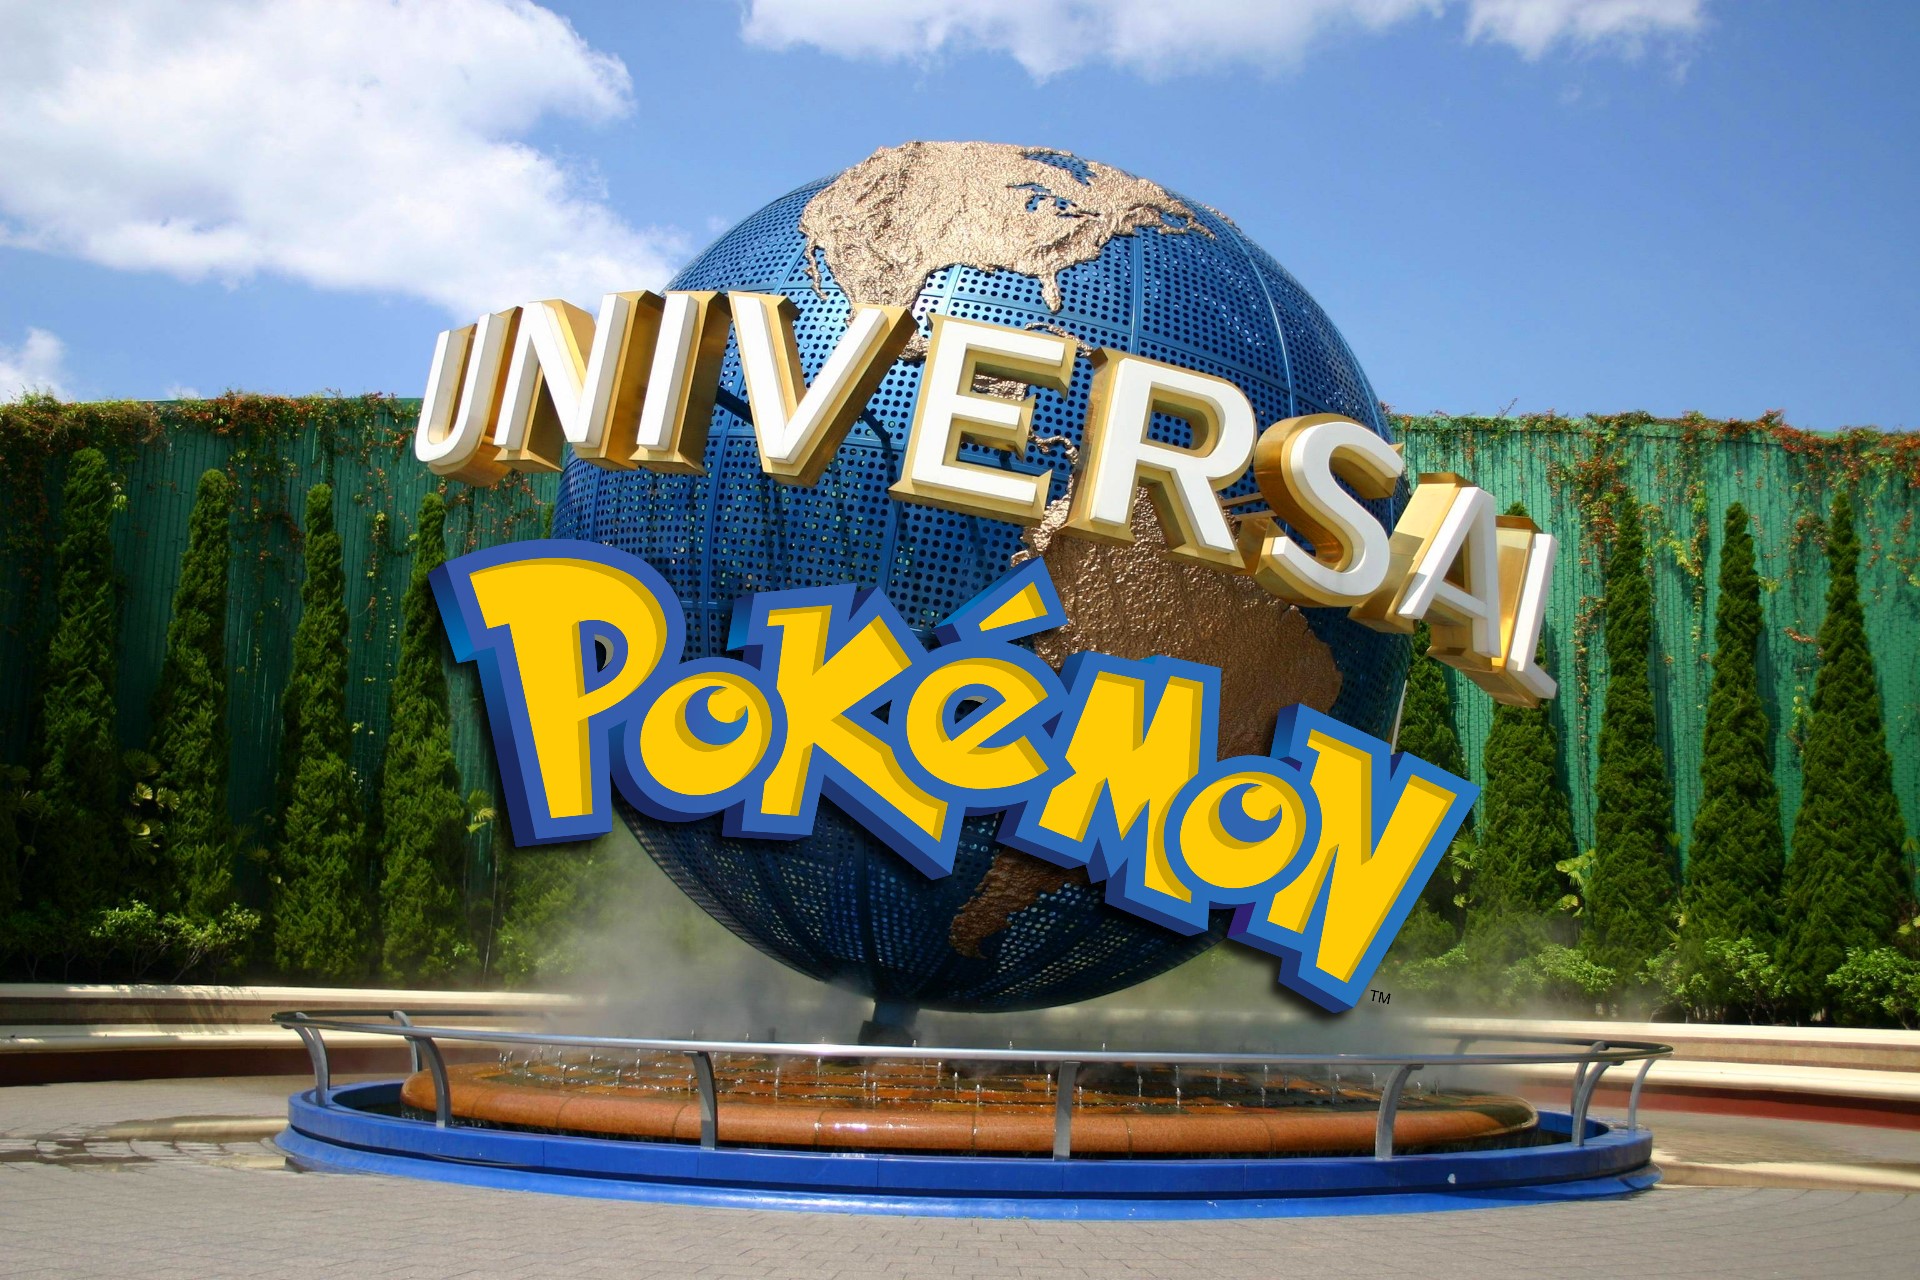 What We Can Learn About Universal Orlando's New Theme Park from Development  Plans – Orlando ParkStop